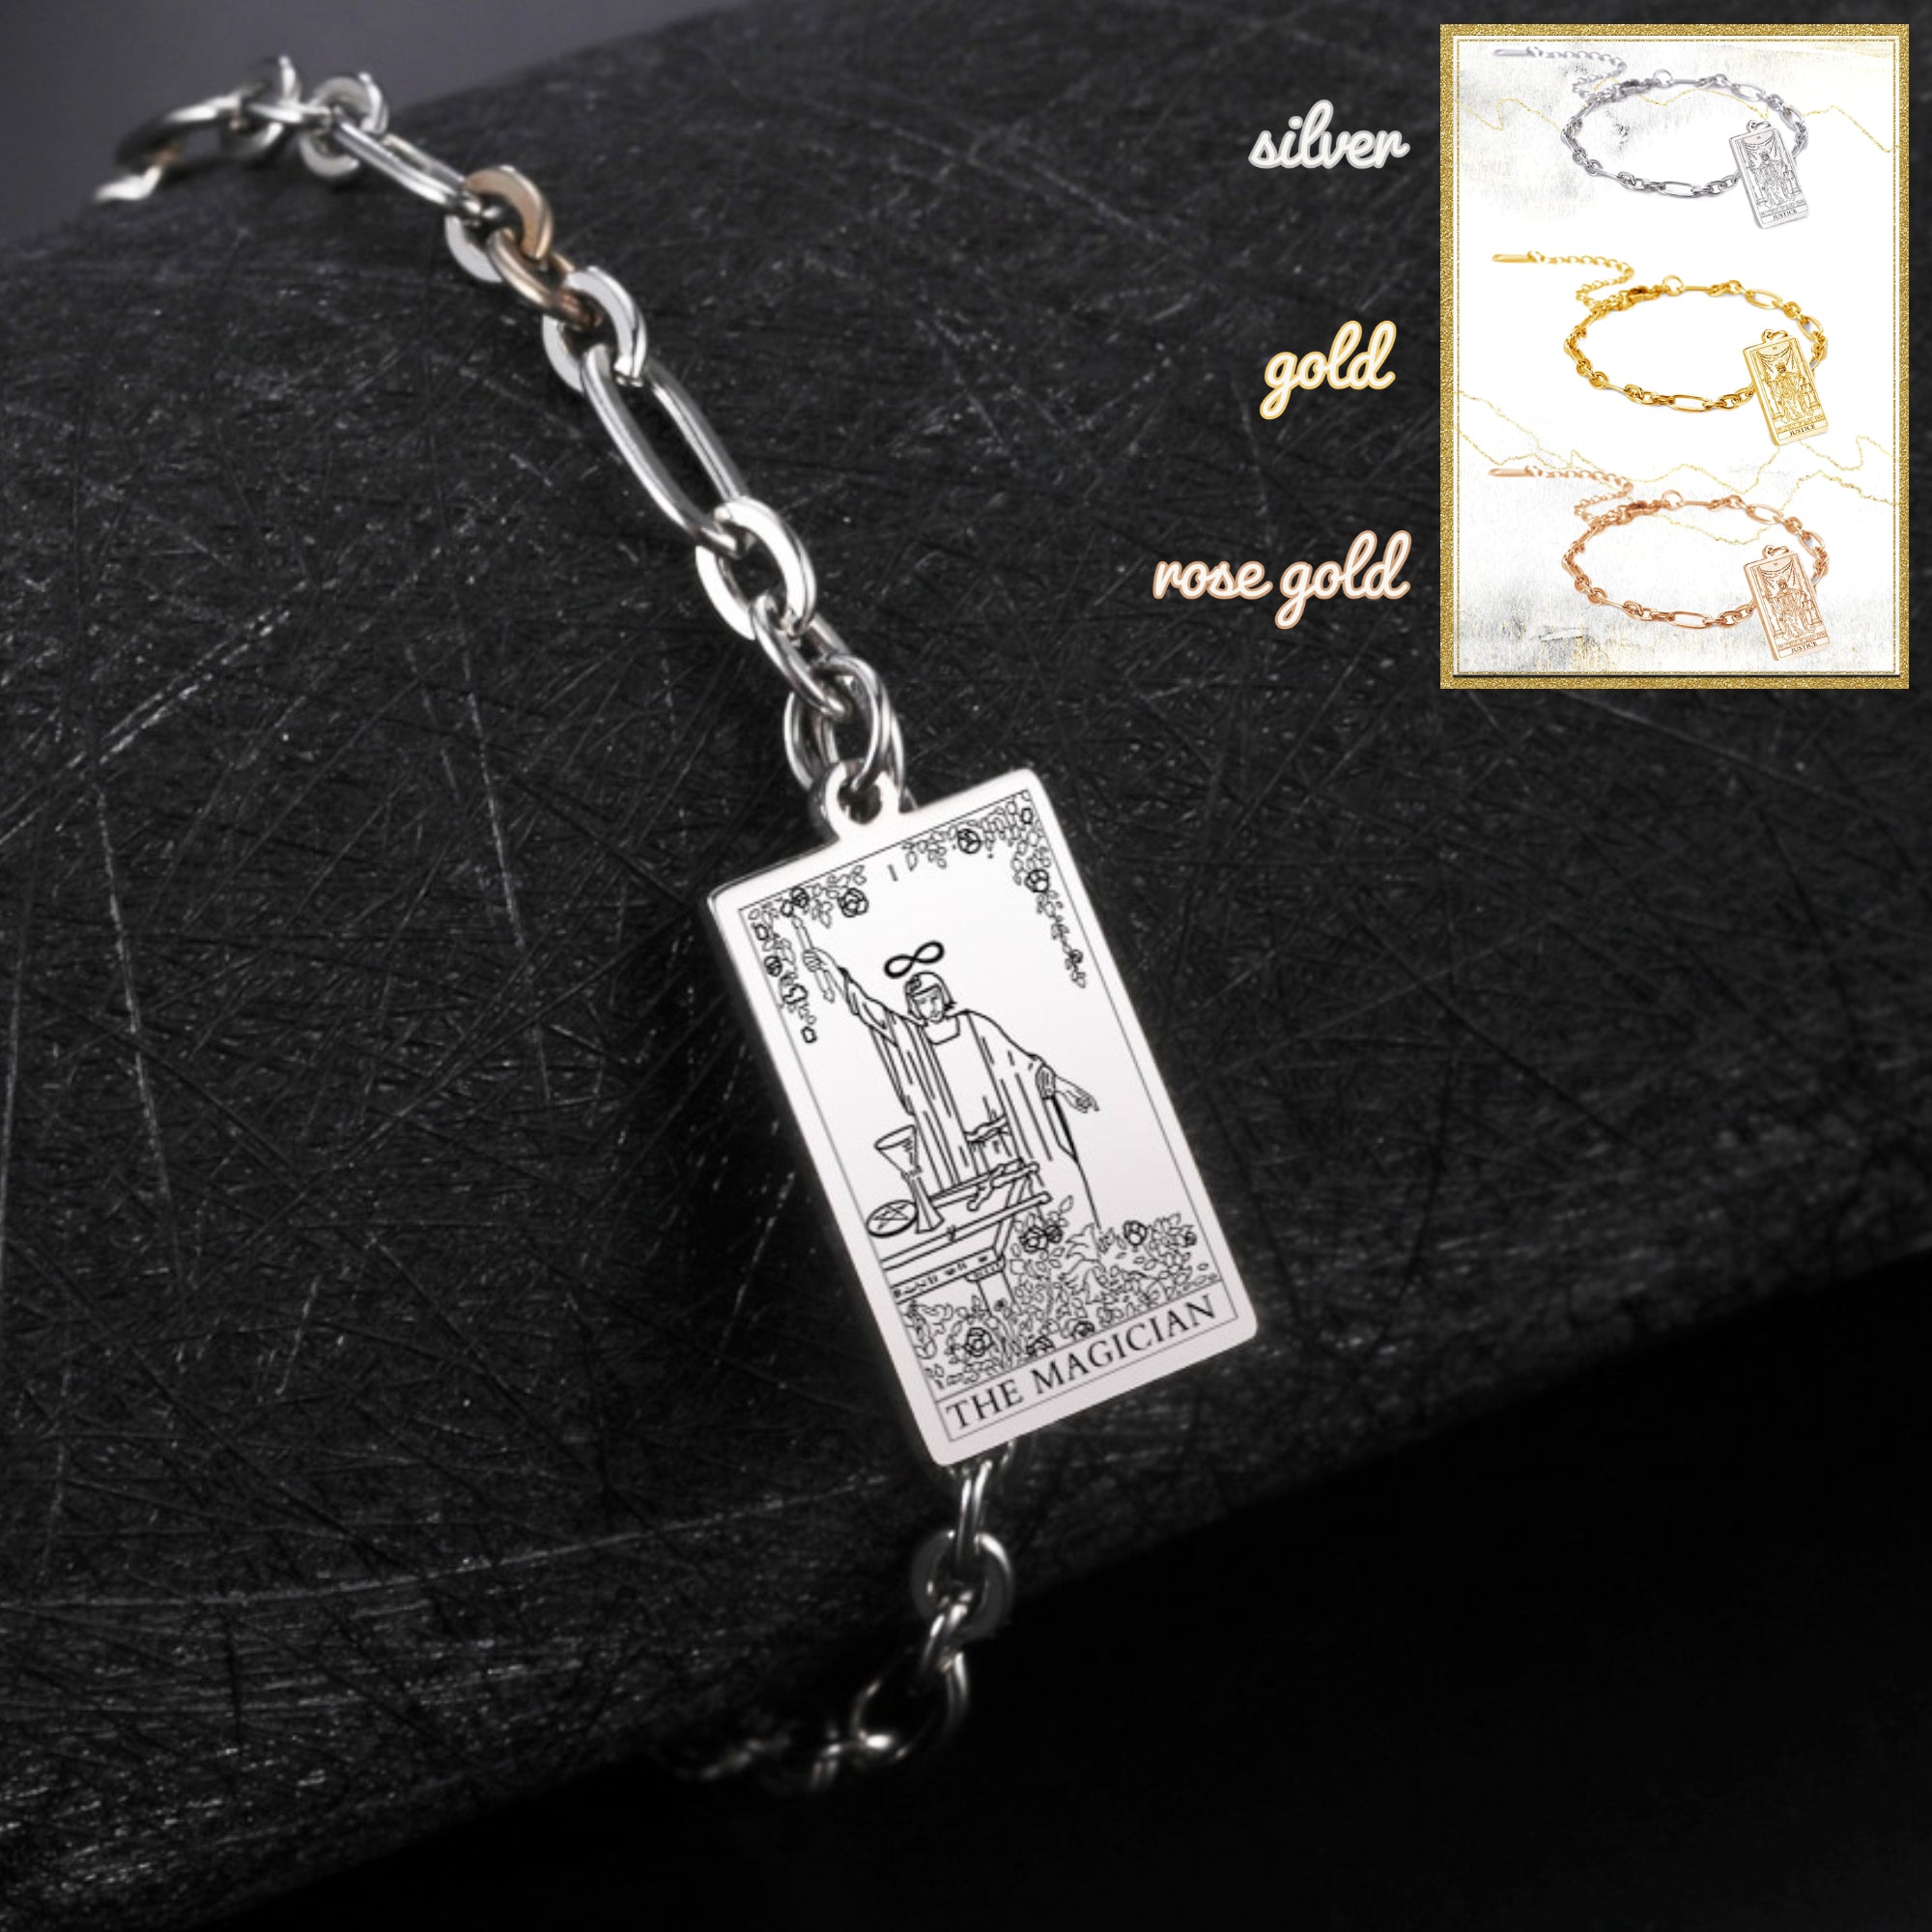 Bracelets With Tarot Card Charms, Stainless Steel Wrist Pendants Of All The 22 Rider-Waite-Smith Major Arcana Divination Cards, Esoteric Jewelry Gift For Spiritual Women | Apollo TarotBracelets With Tarot Card Charms, Stainless Steel Wrist Pendants Of All The 22 Rider-Waite-Smith Major Arcana Divination Cards, Esoteric Jewelry Gift For Spiritual Women | Apollo Tarot